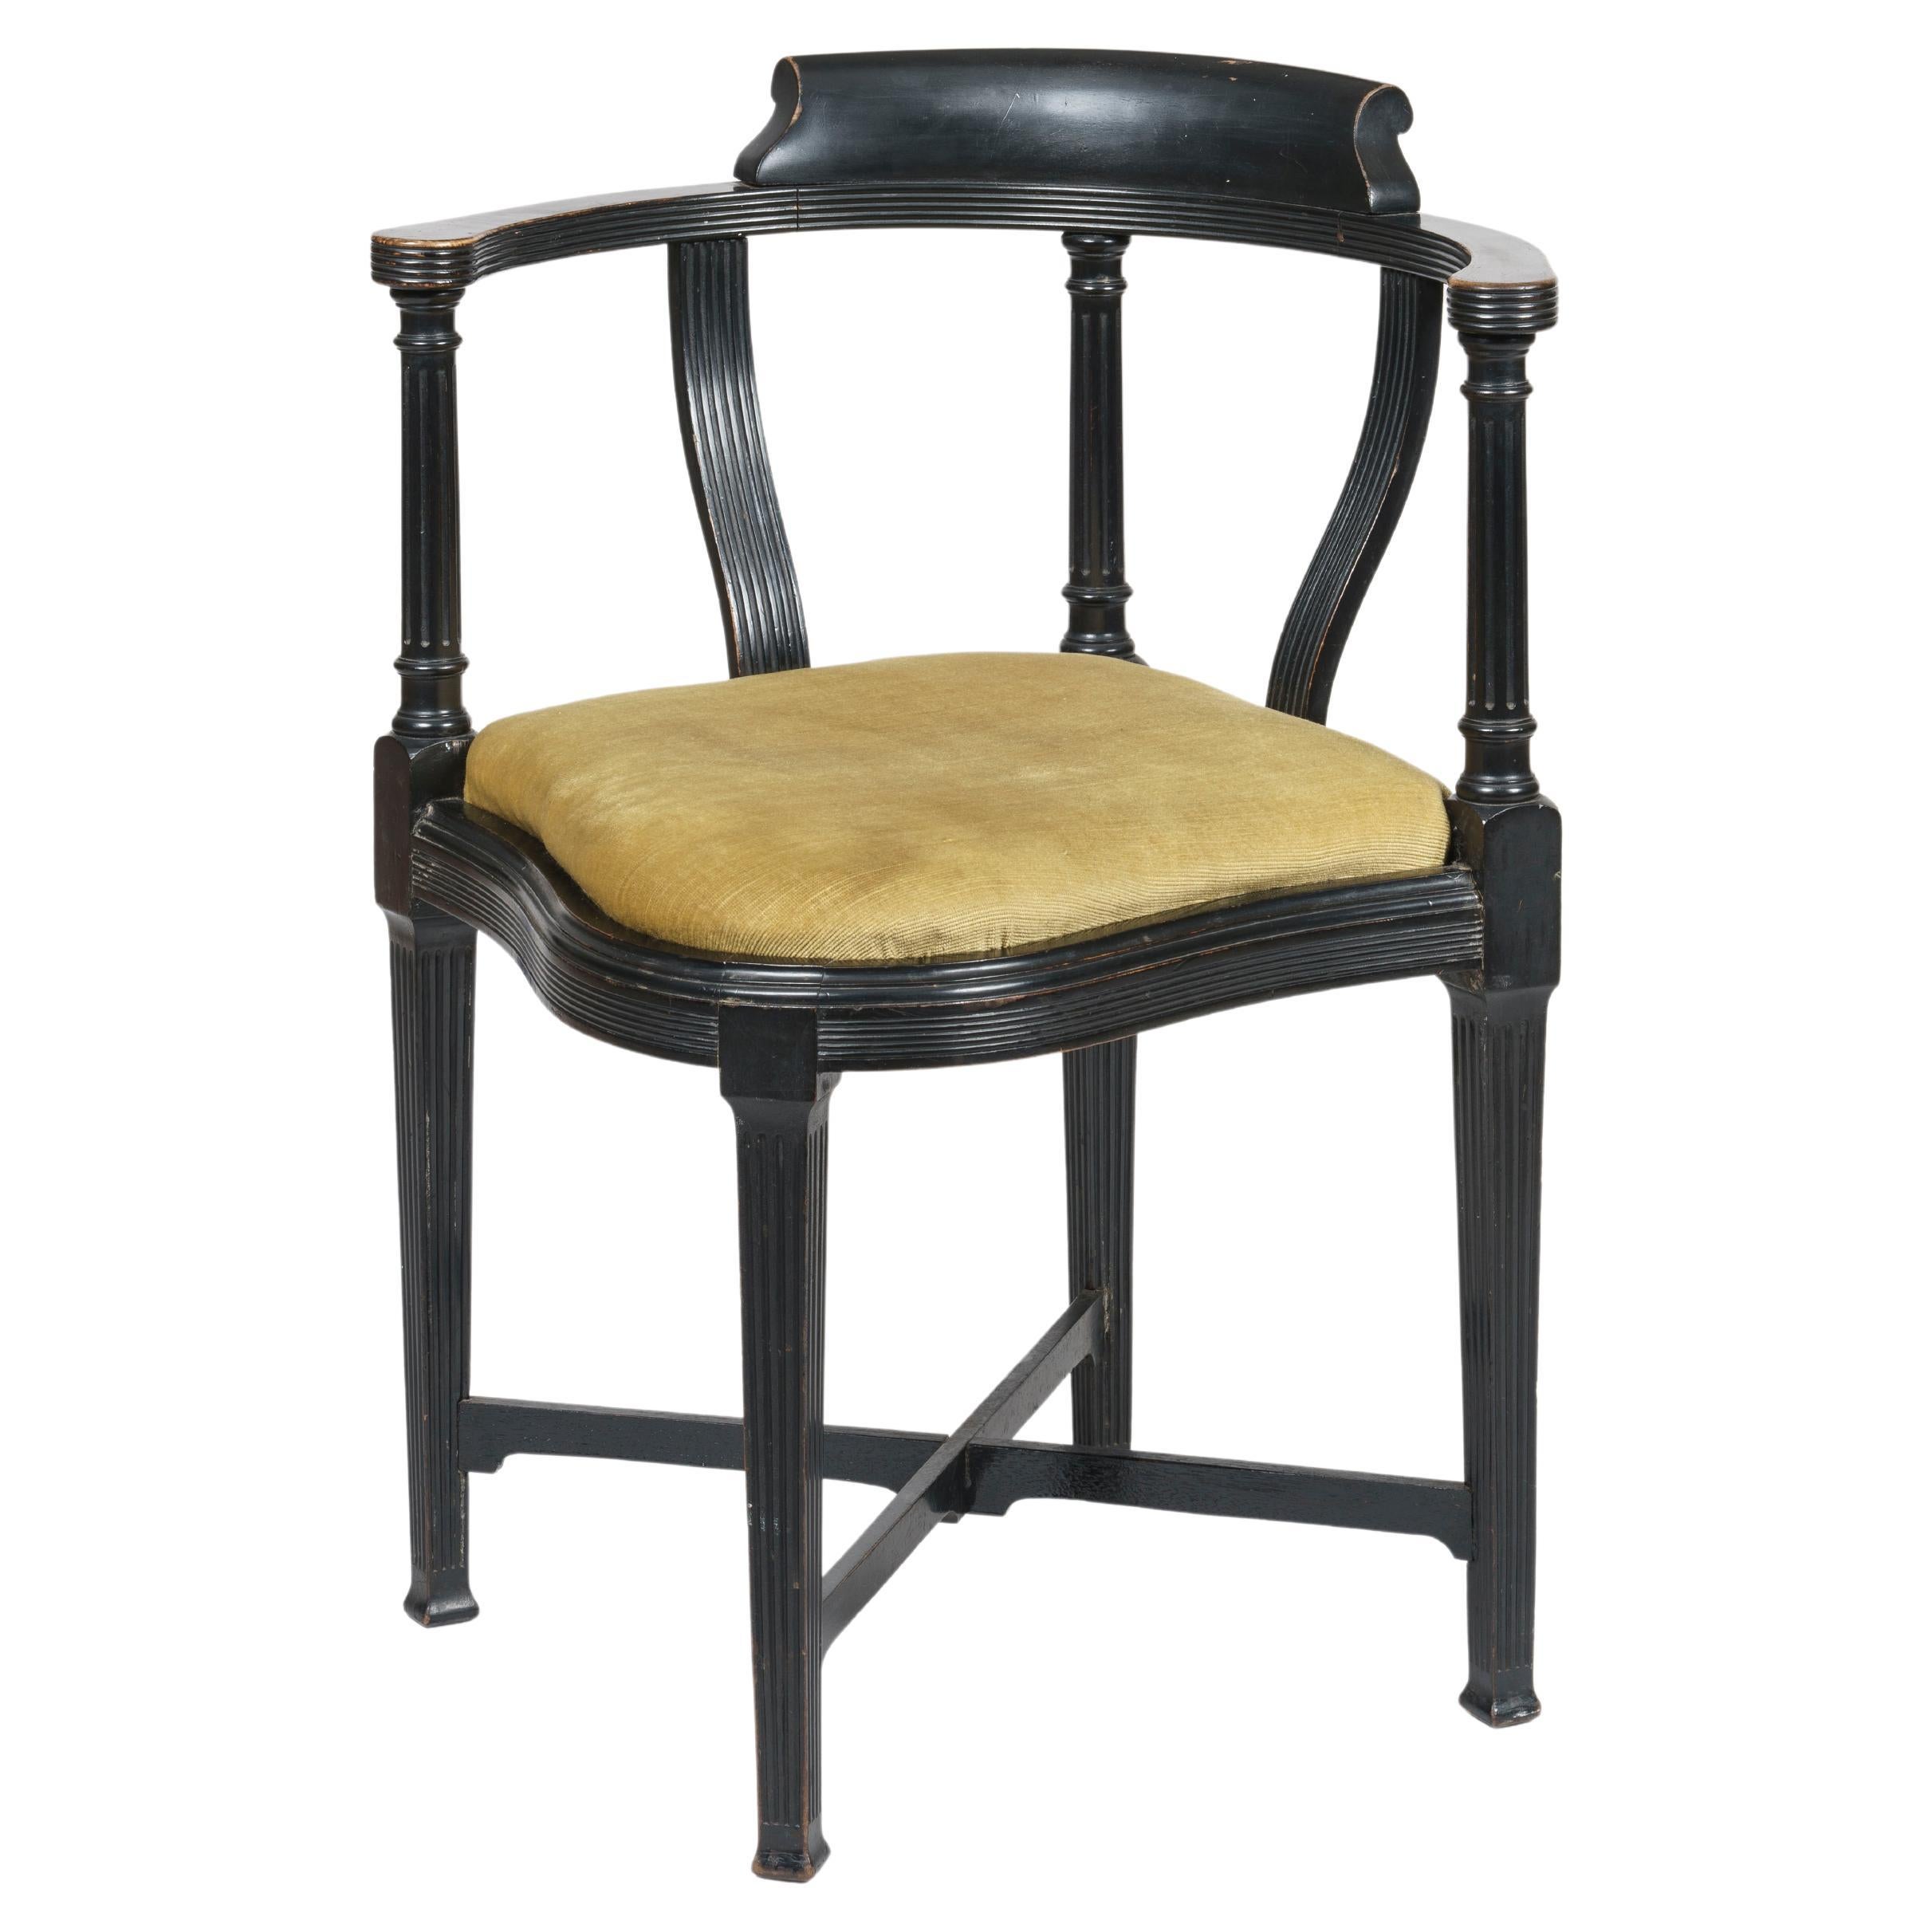 English Aesthetic Movement Chair by Lamb of Manchester For Sale